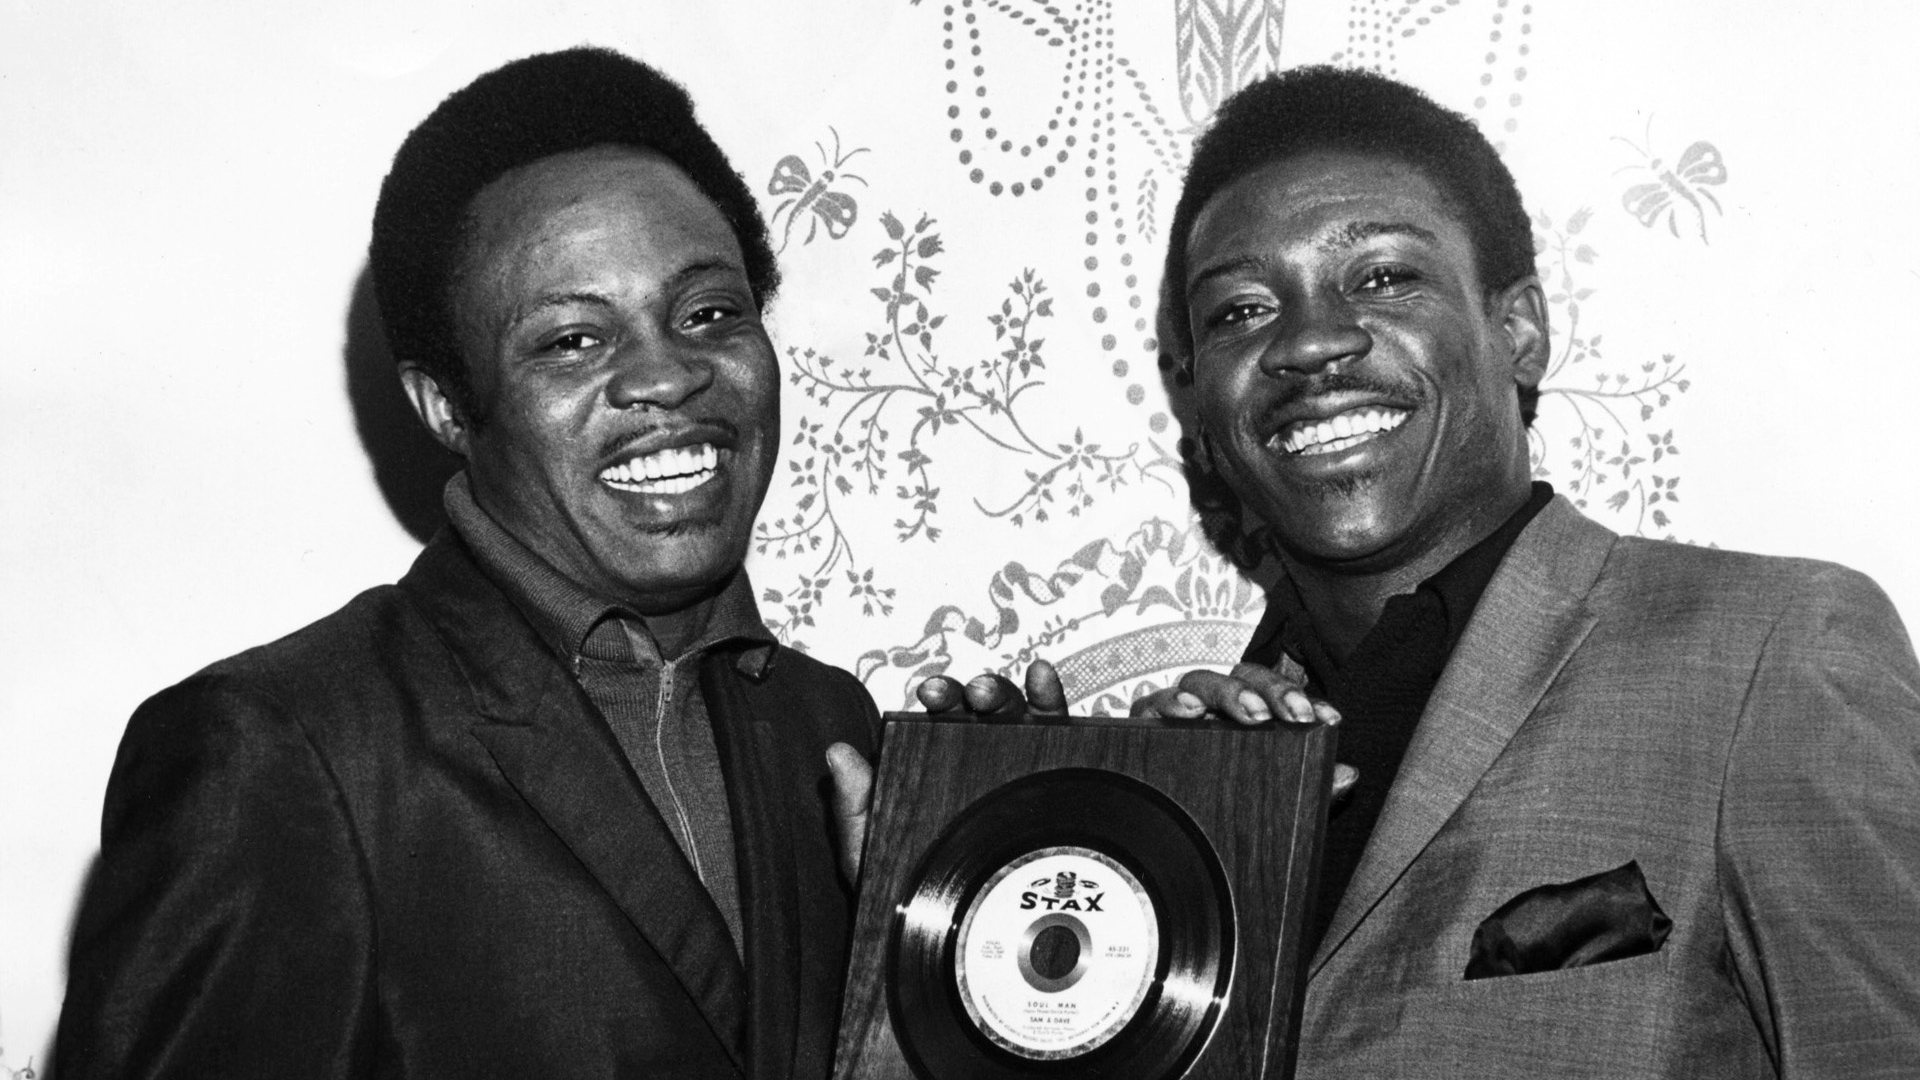 Sam And Dave